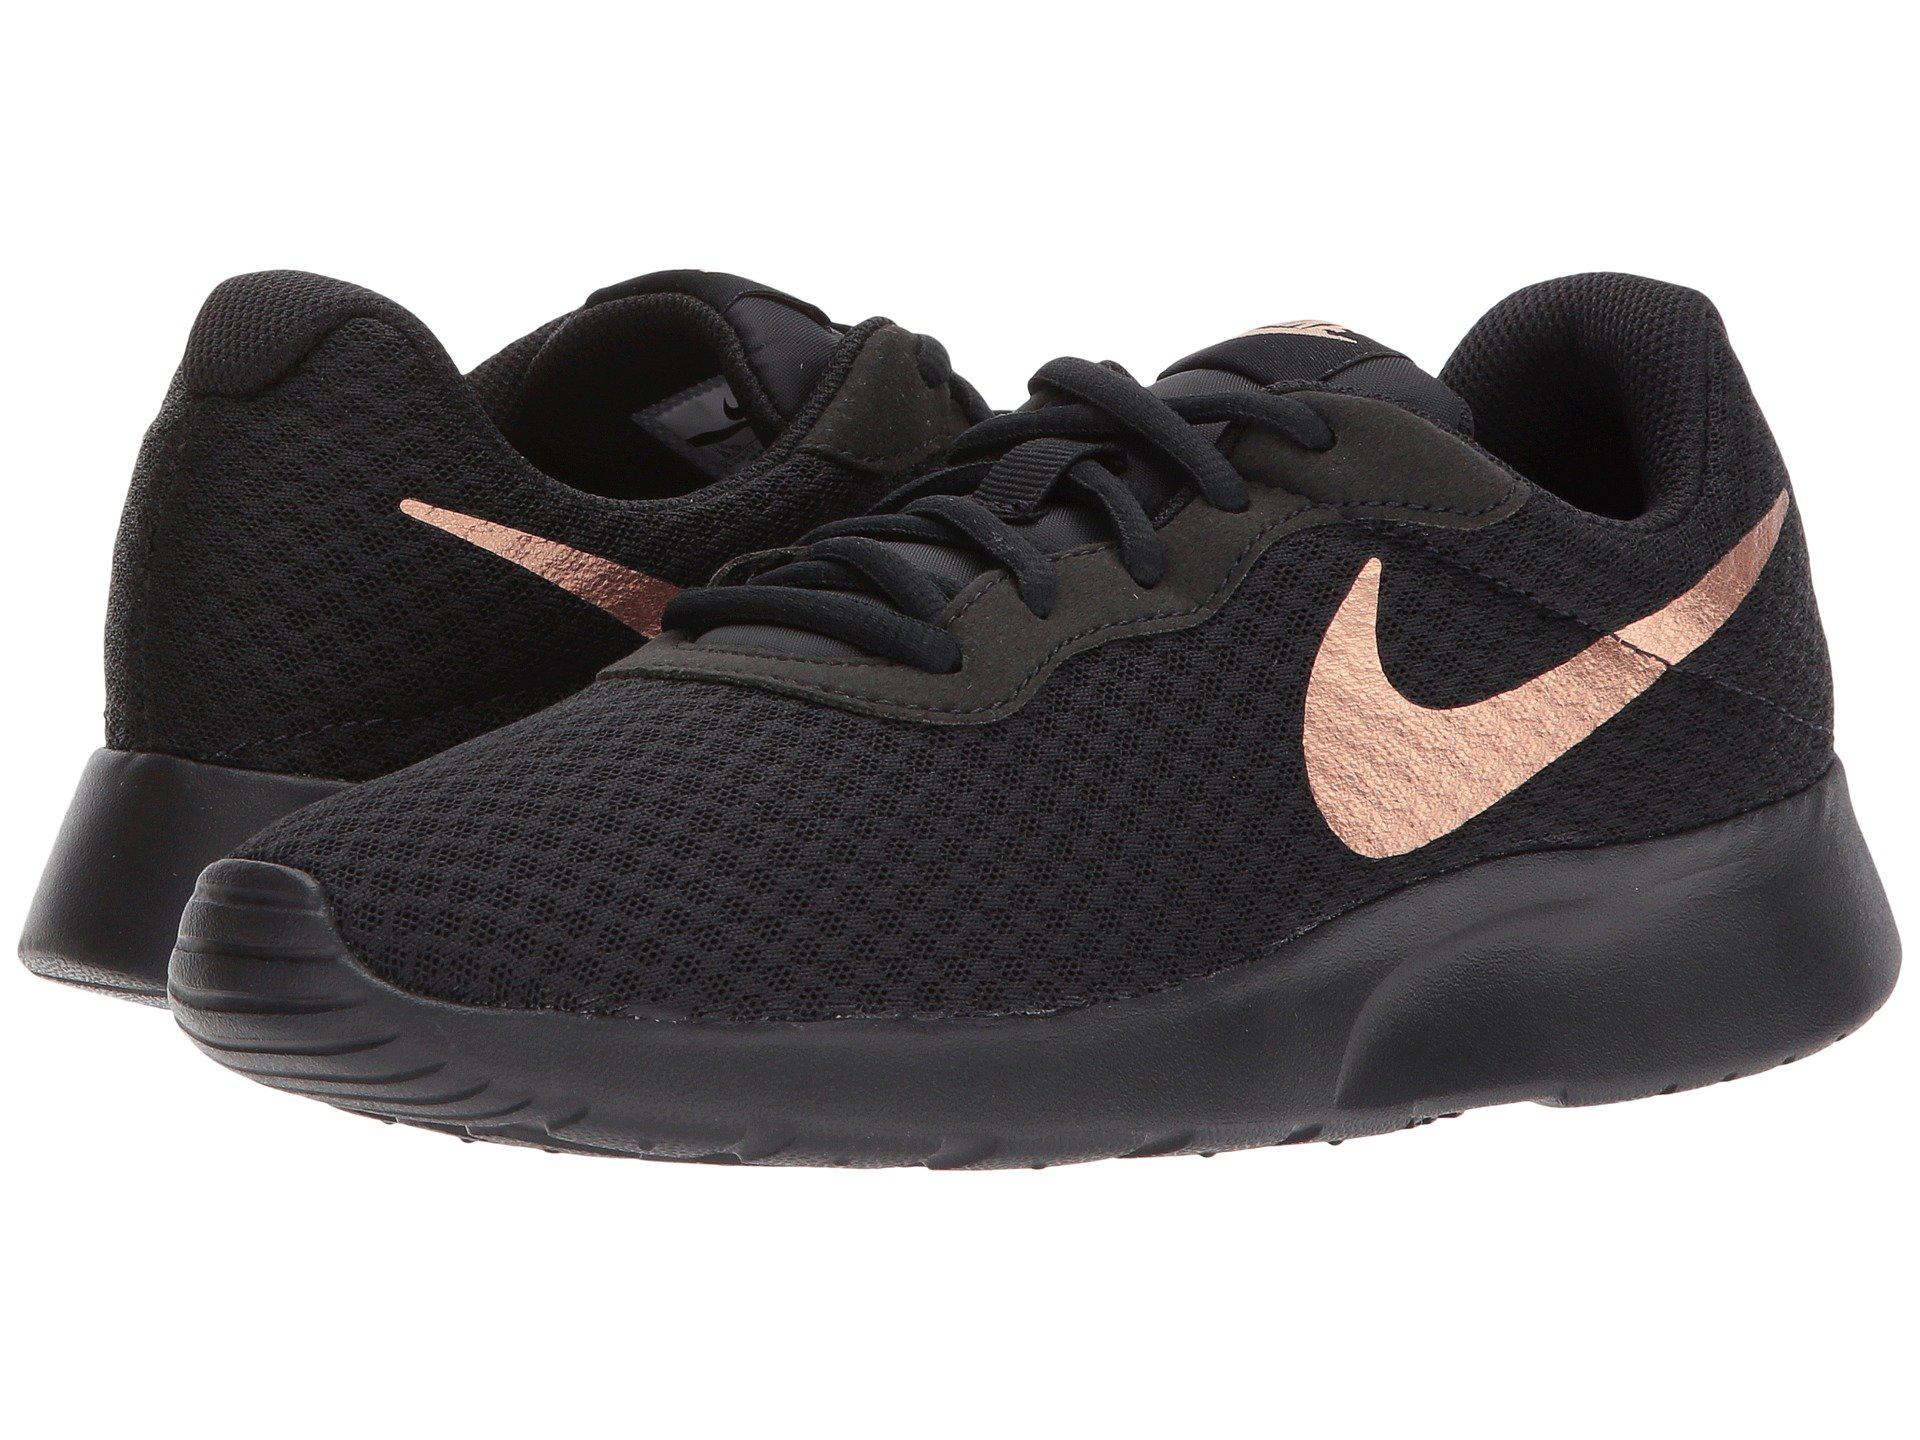 nike tanjun women's athletic shoes black and gold